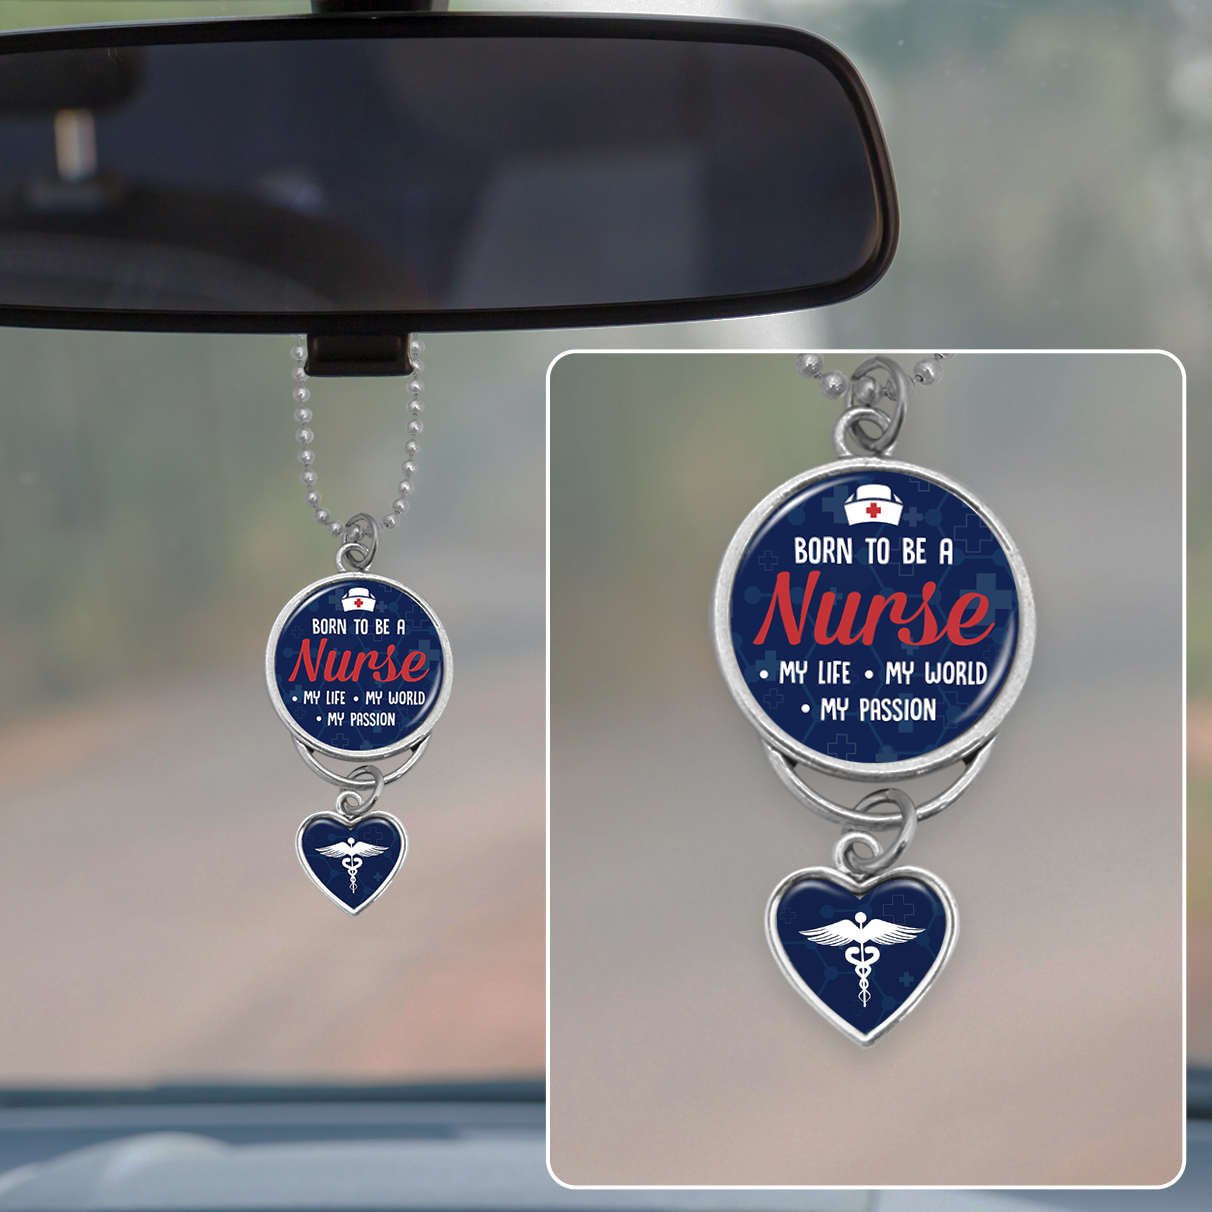 Born To Be A Nurse, My Life, My World, My Passion Rearview Mirror Charm